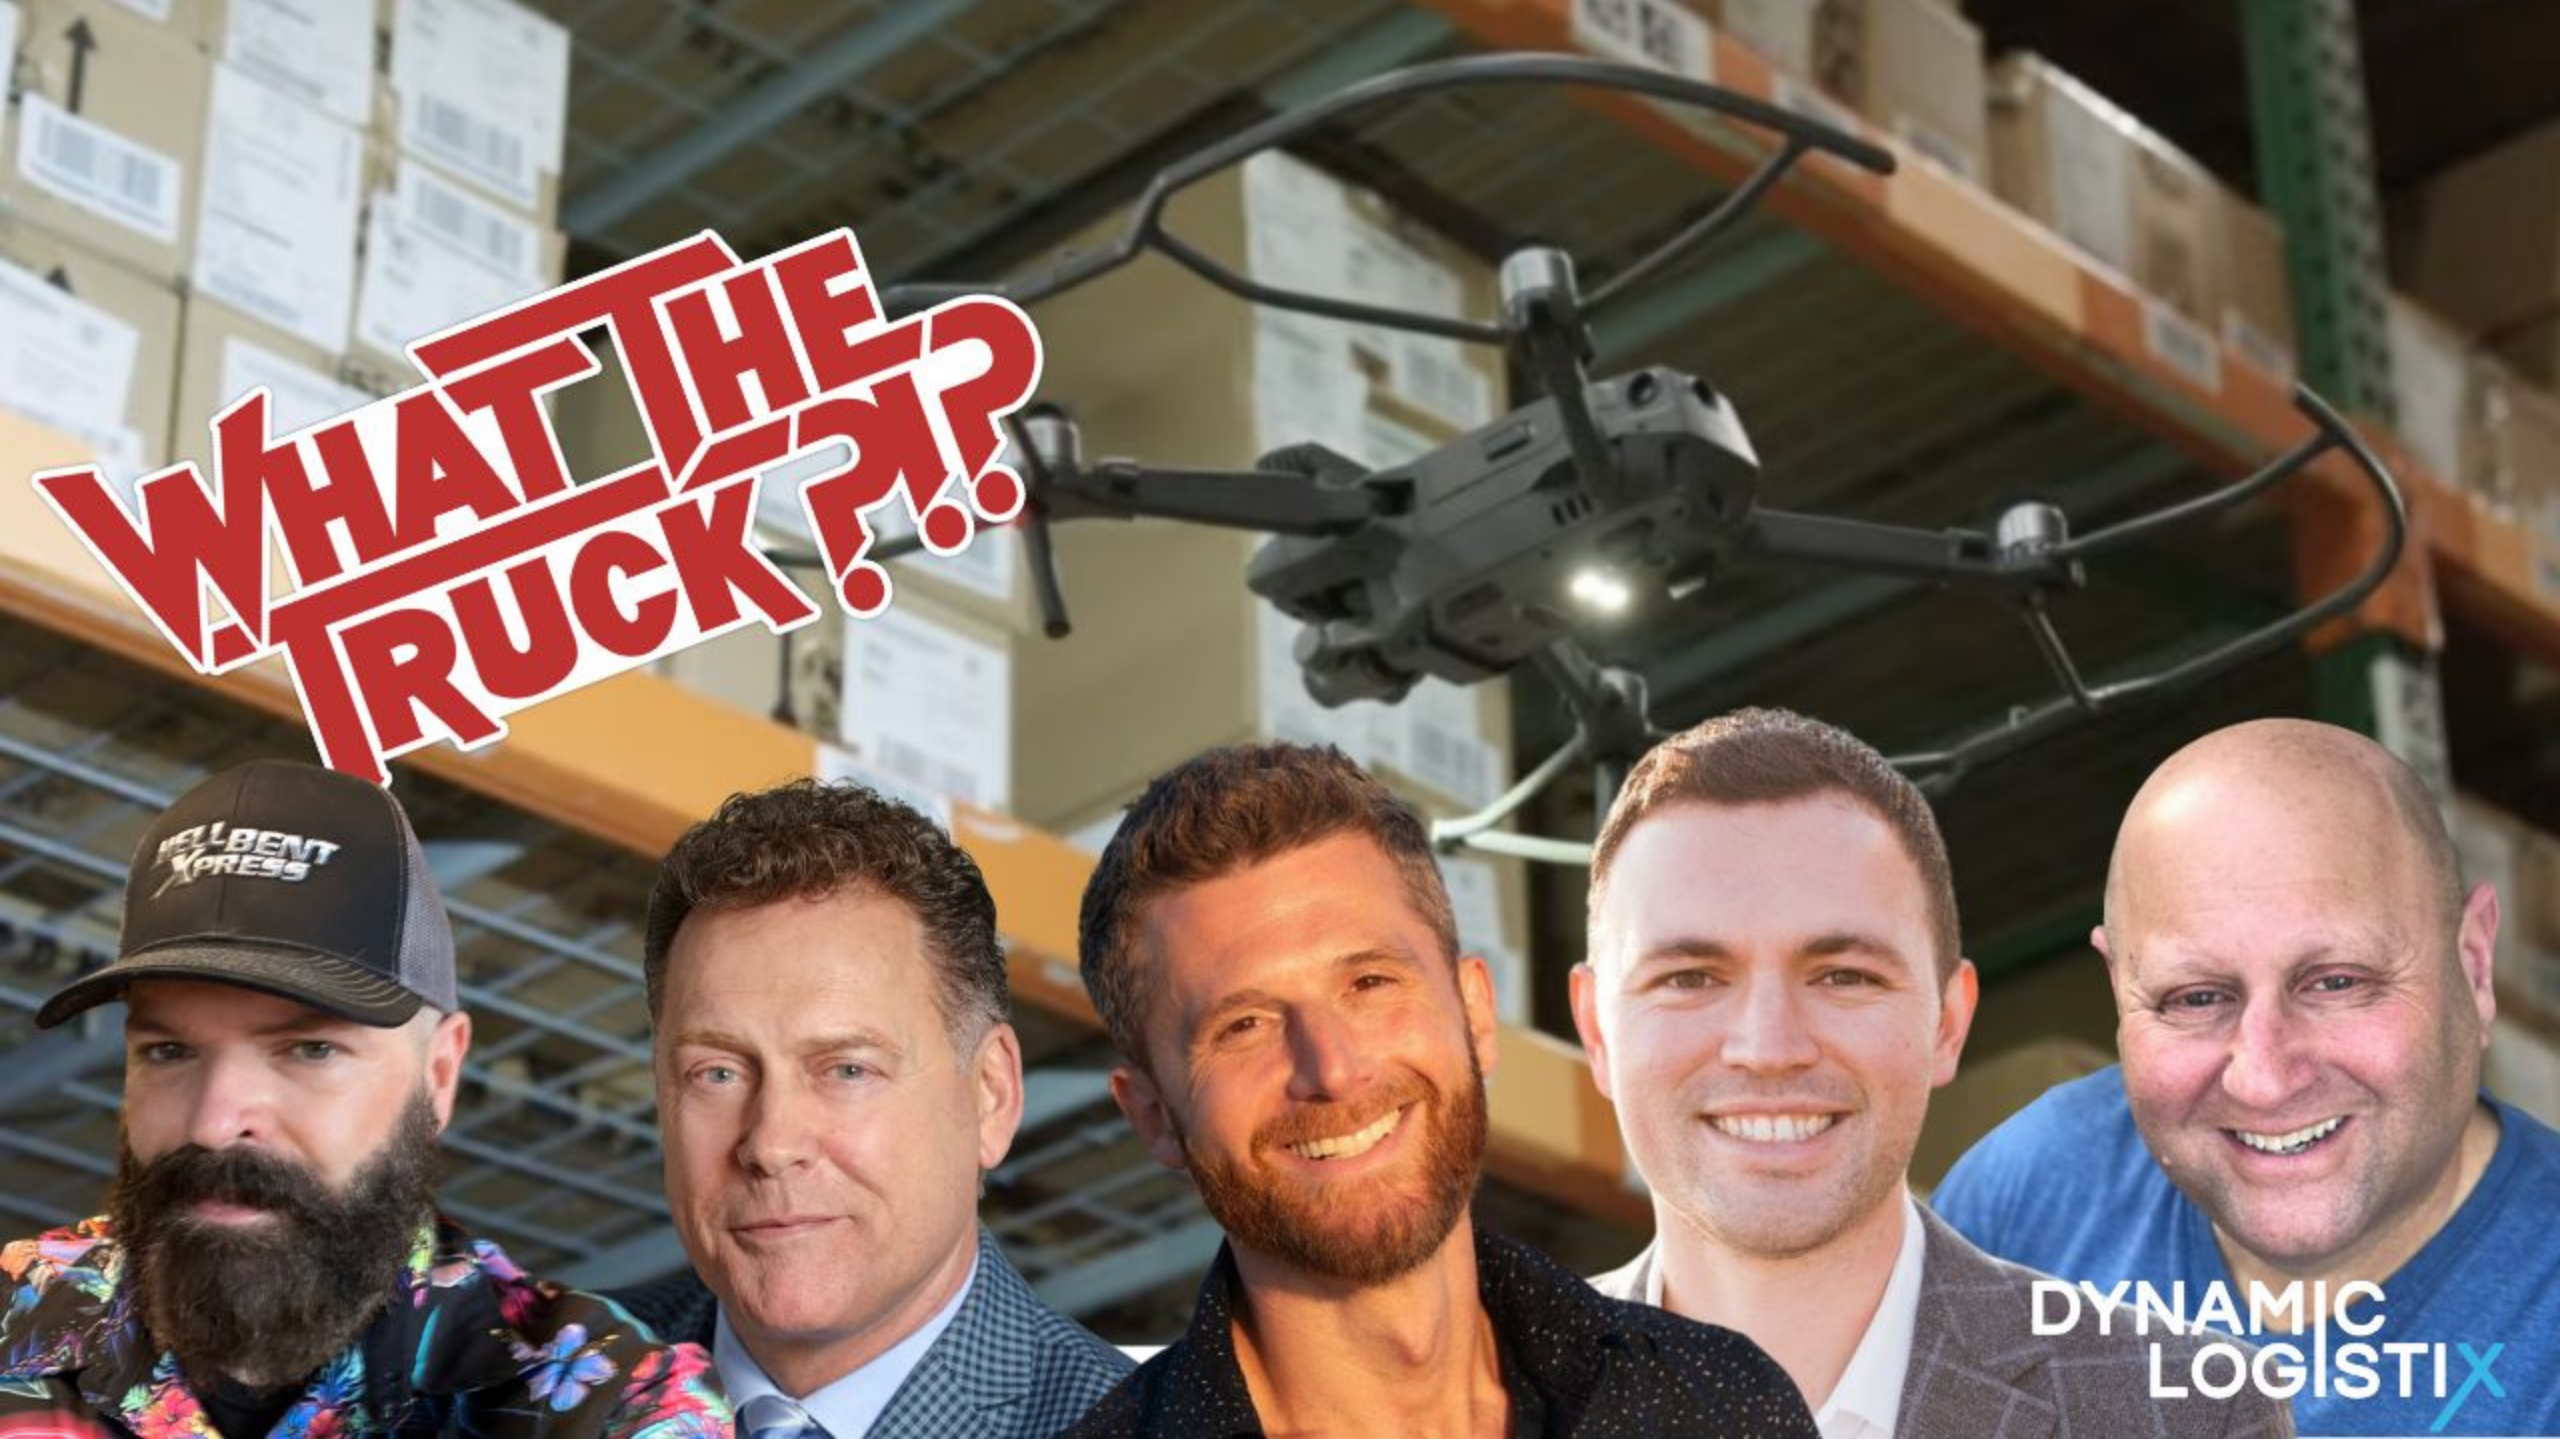 A promotional image for Dynamic Logistix features five men in front of a warehouse backdrop filled with shelves of boxes. A drone hovers in the center. Text reads "WHAT THE RUCK?!?" in large red letters on the left.